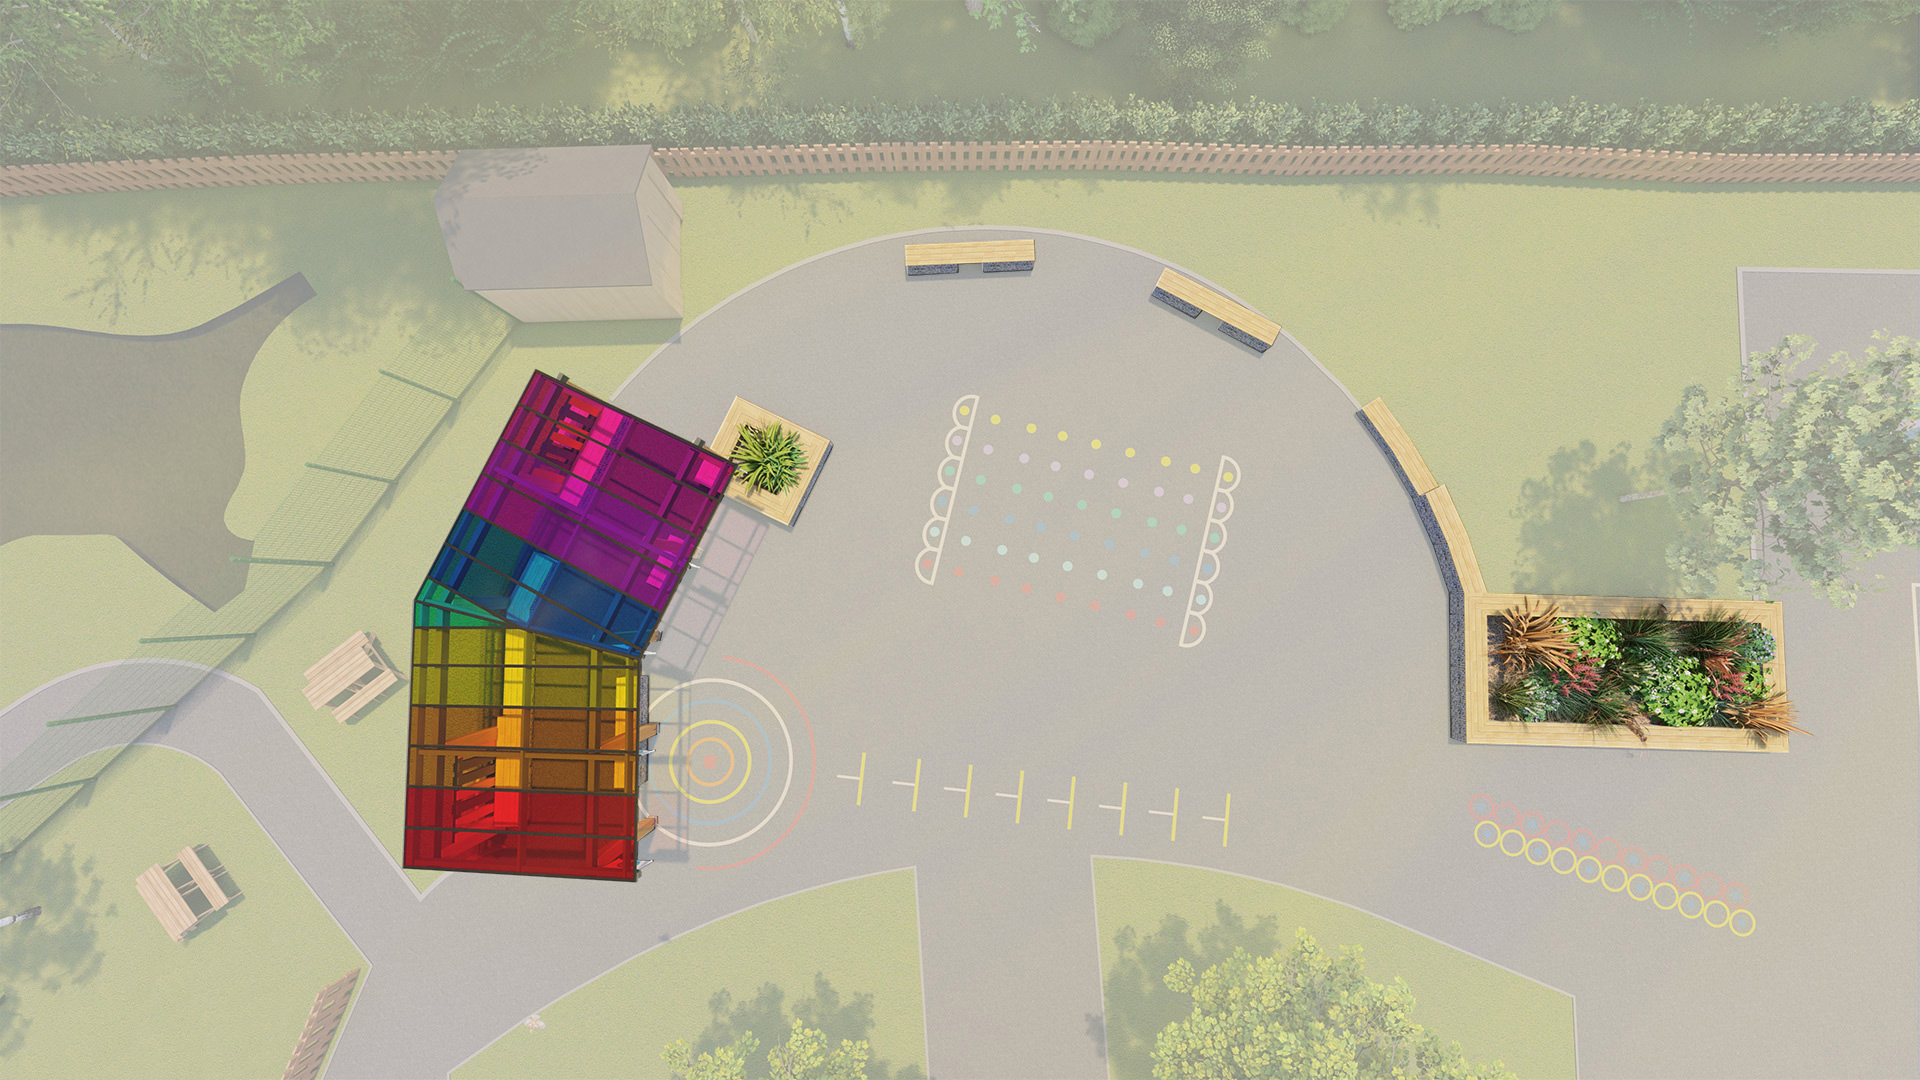 visual fade plan for school playground with colourful shelter